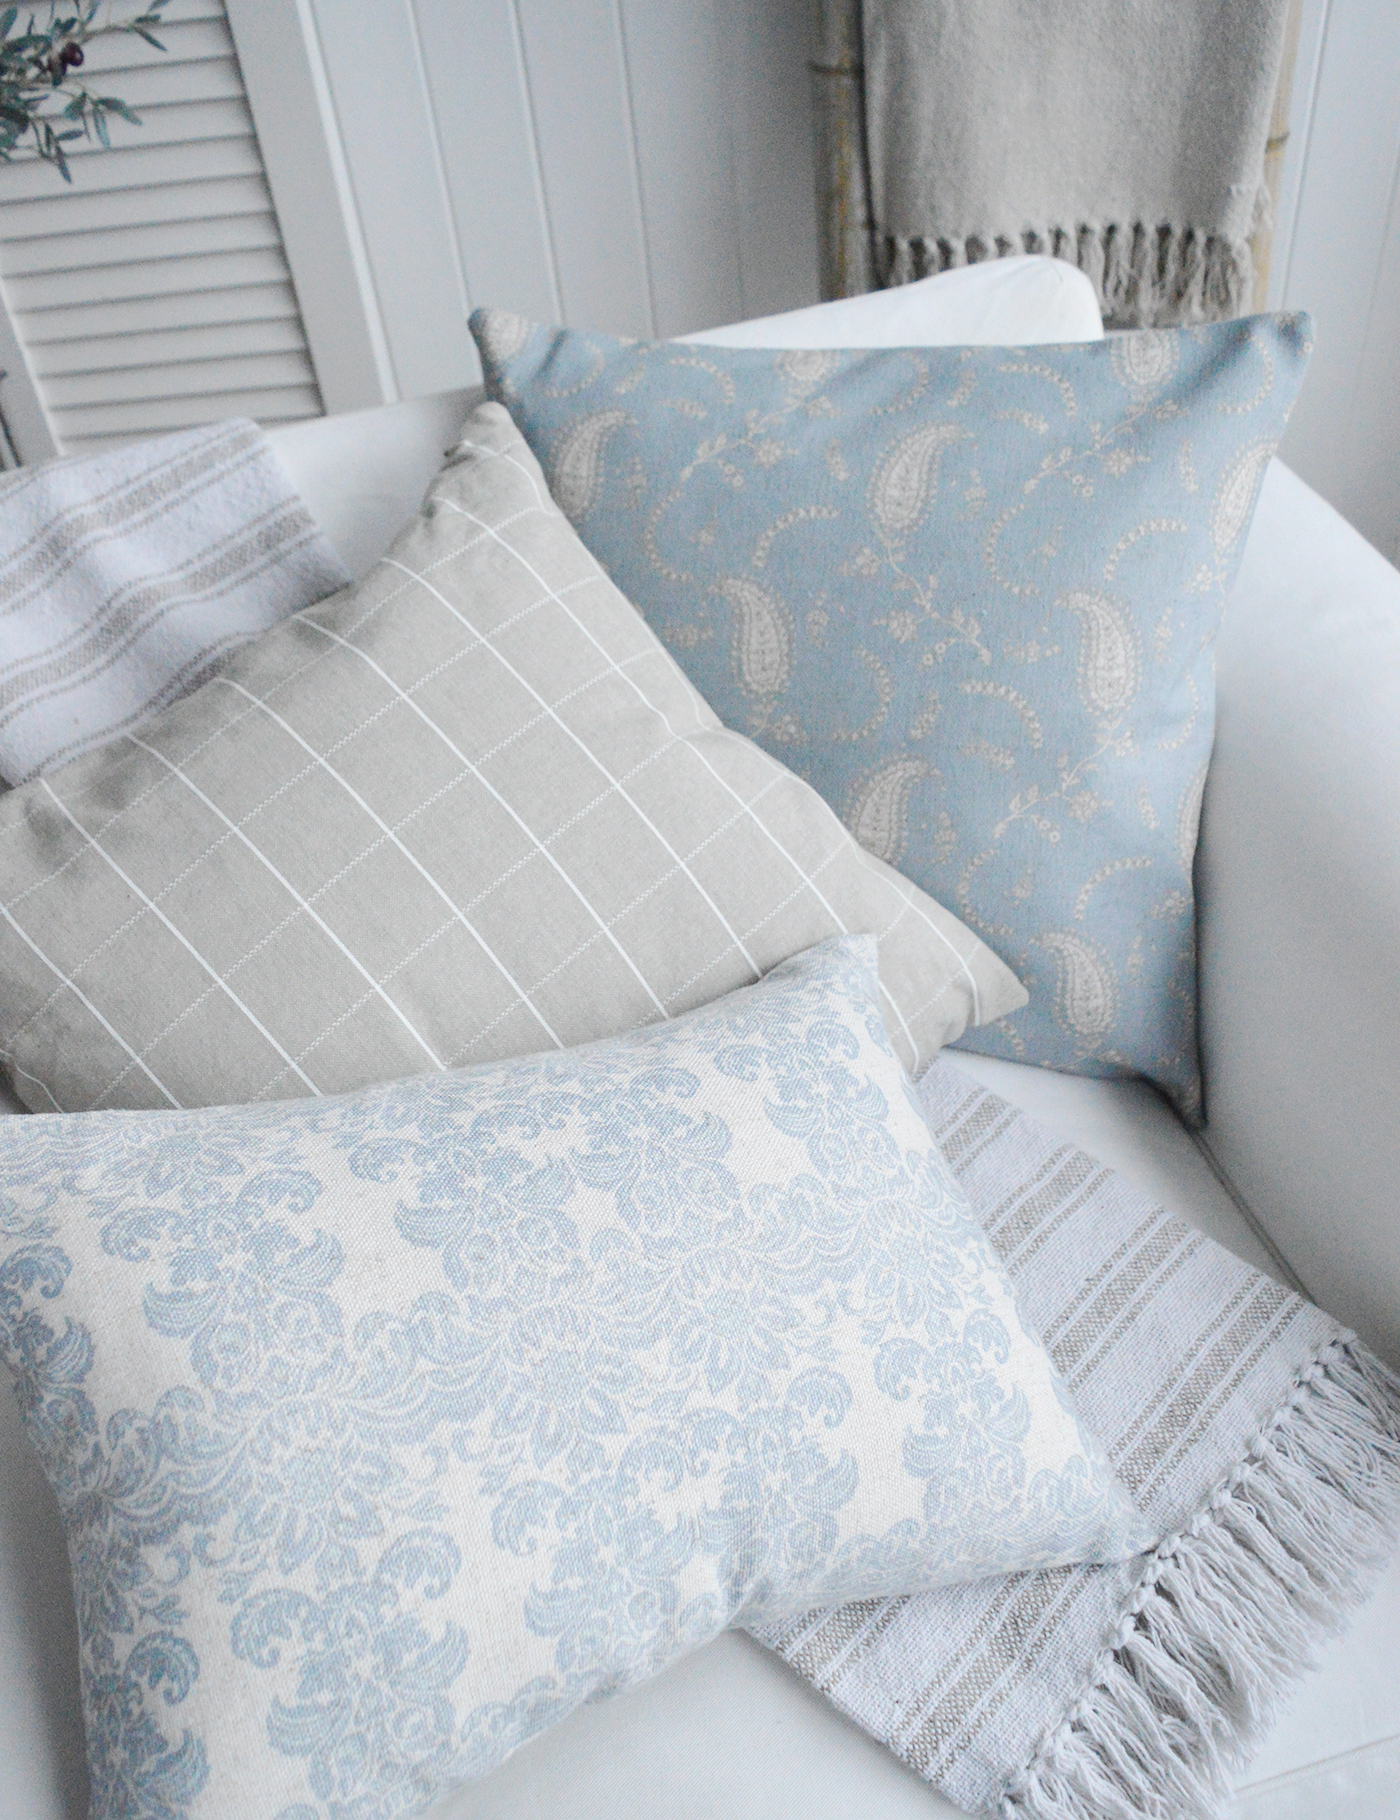 Coastal cushions and throws in blues and taupes for a luxury Hamptons beach house home and interior